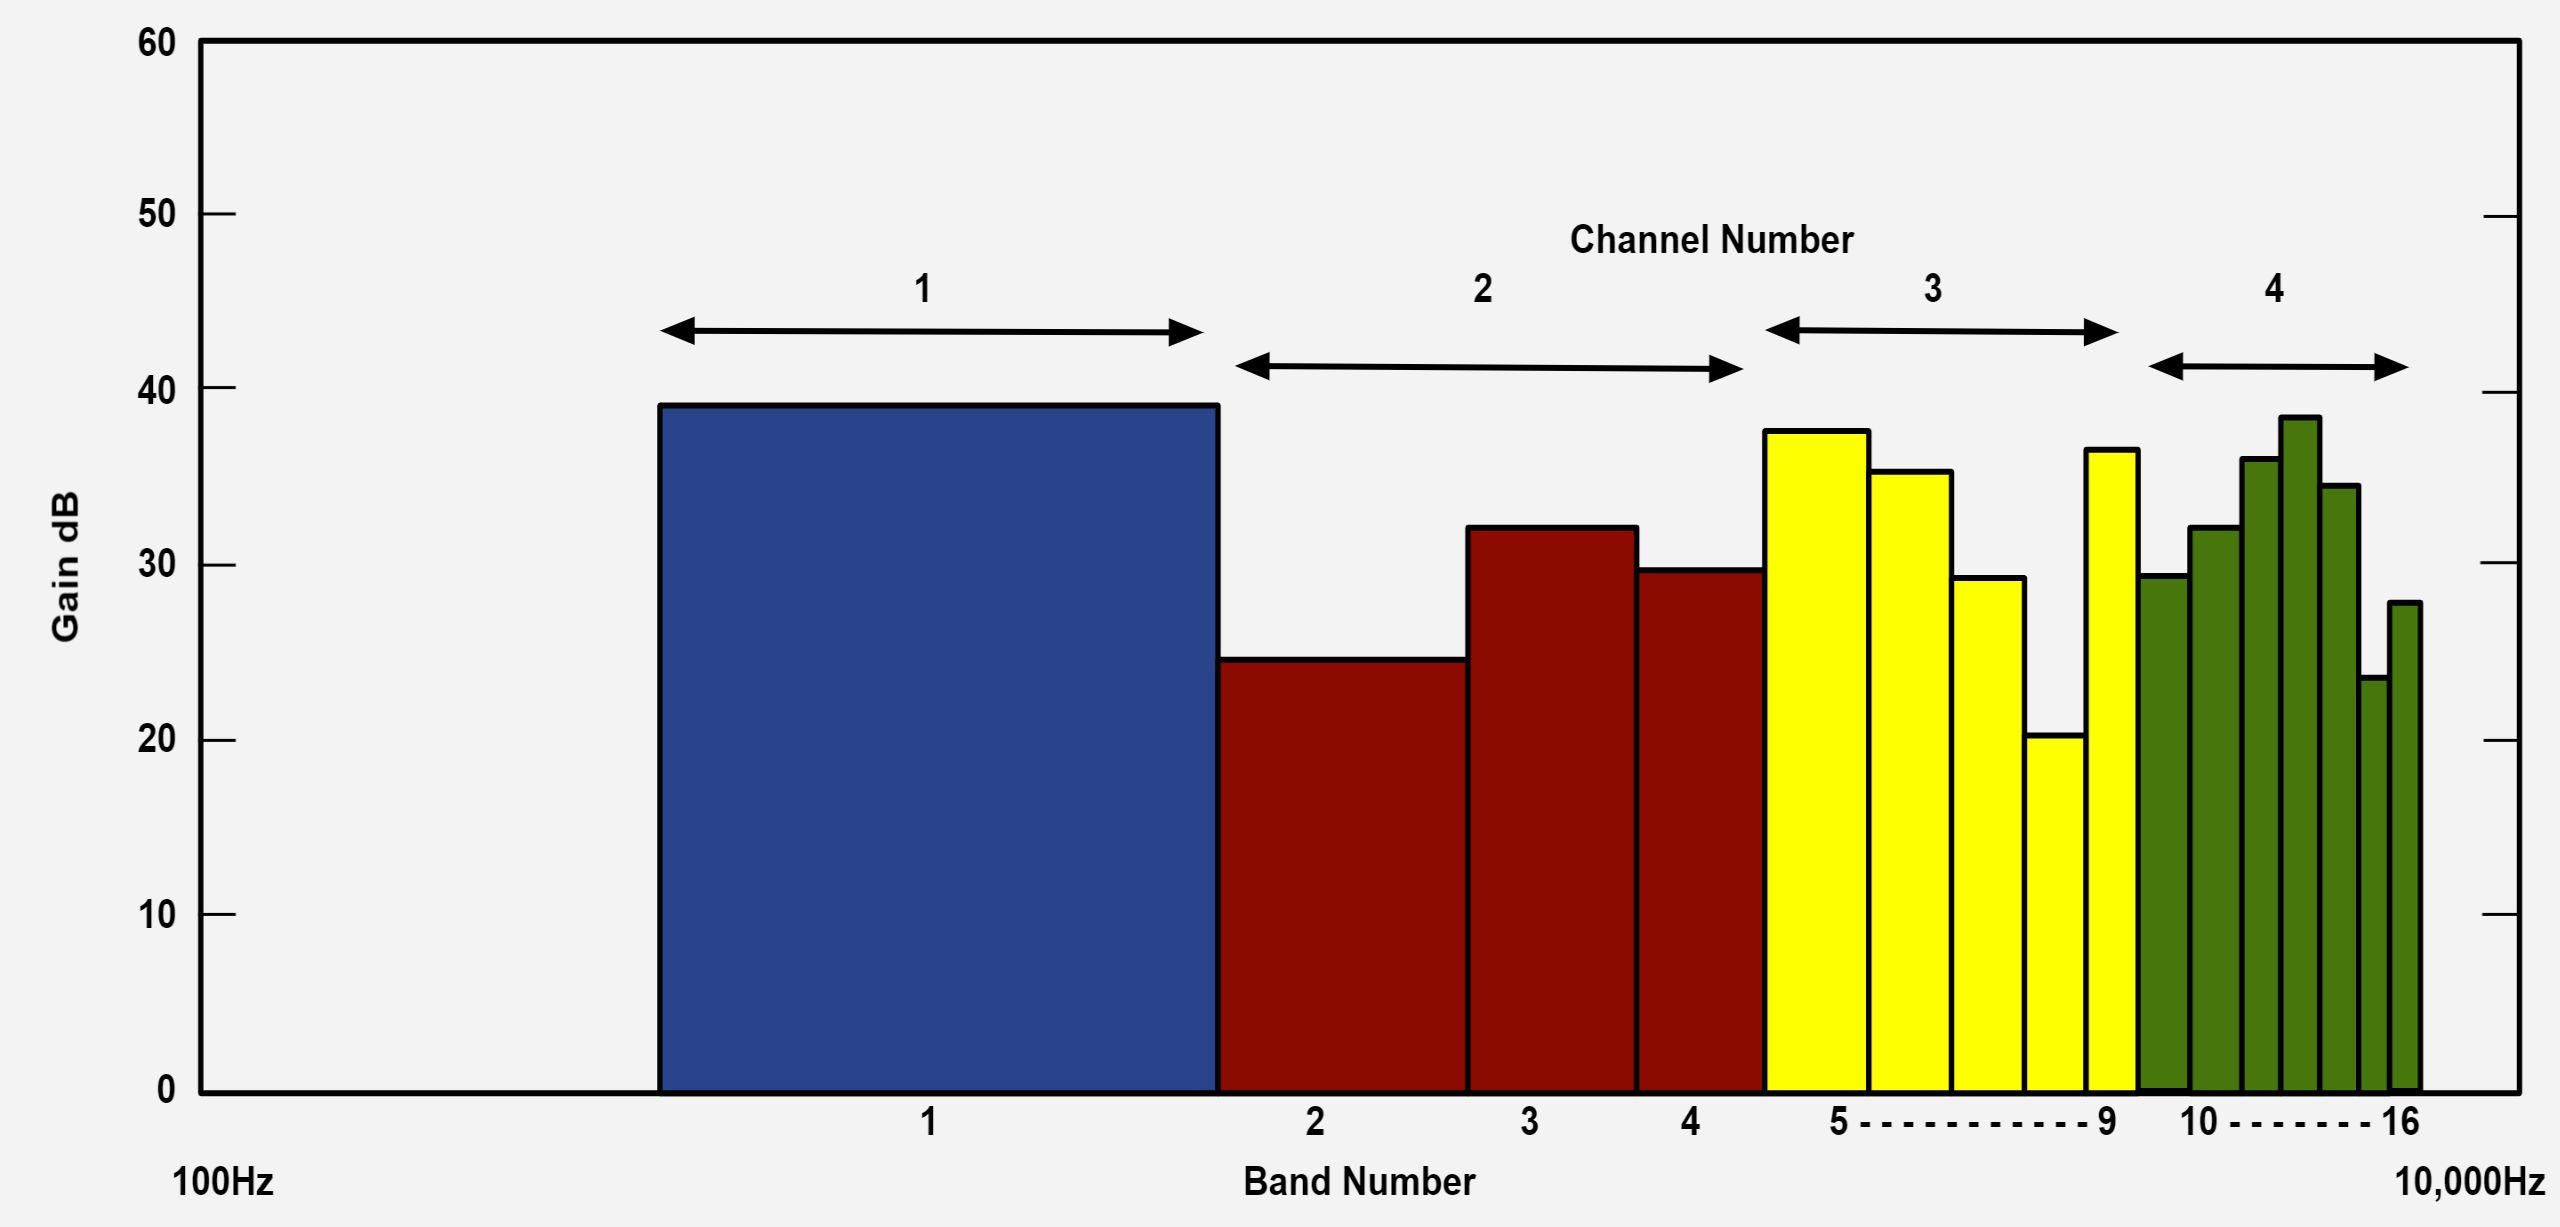 A graphic representation of channels and bands within a digital hearing aid.